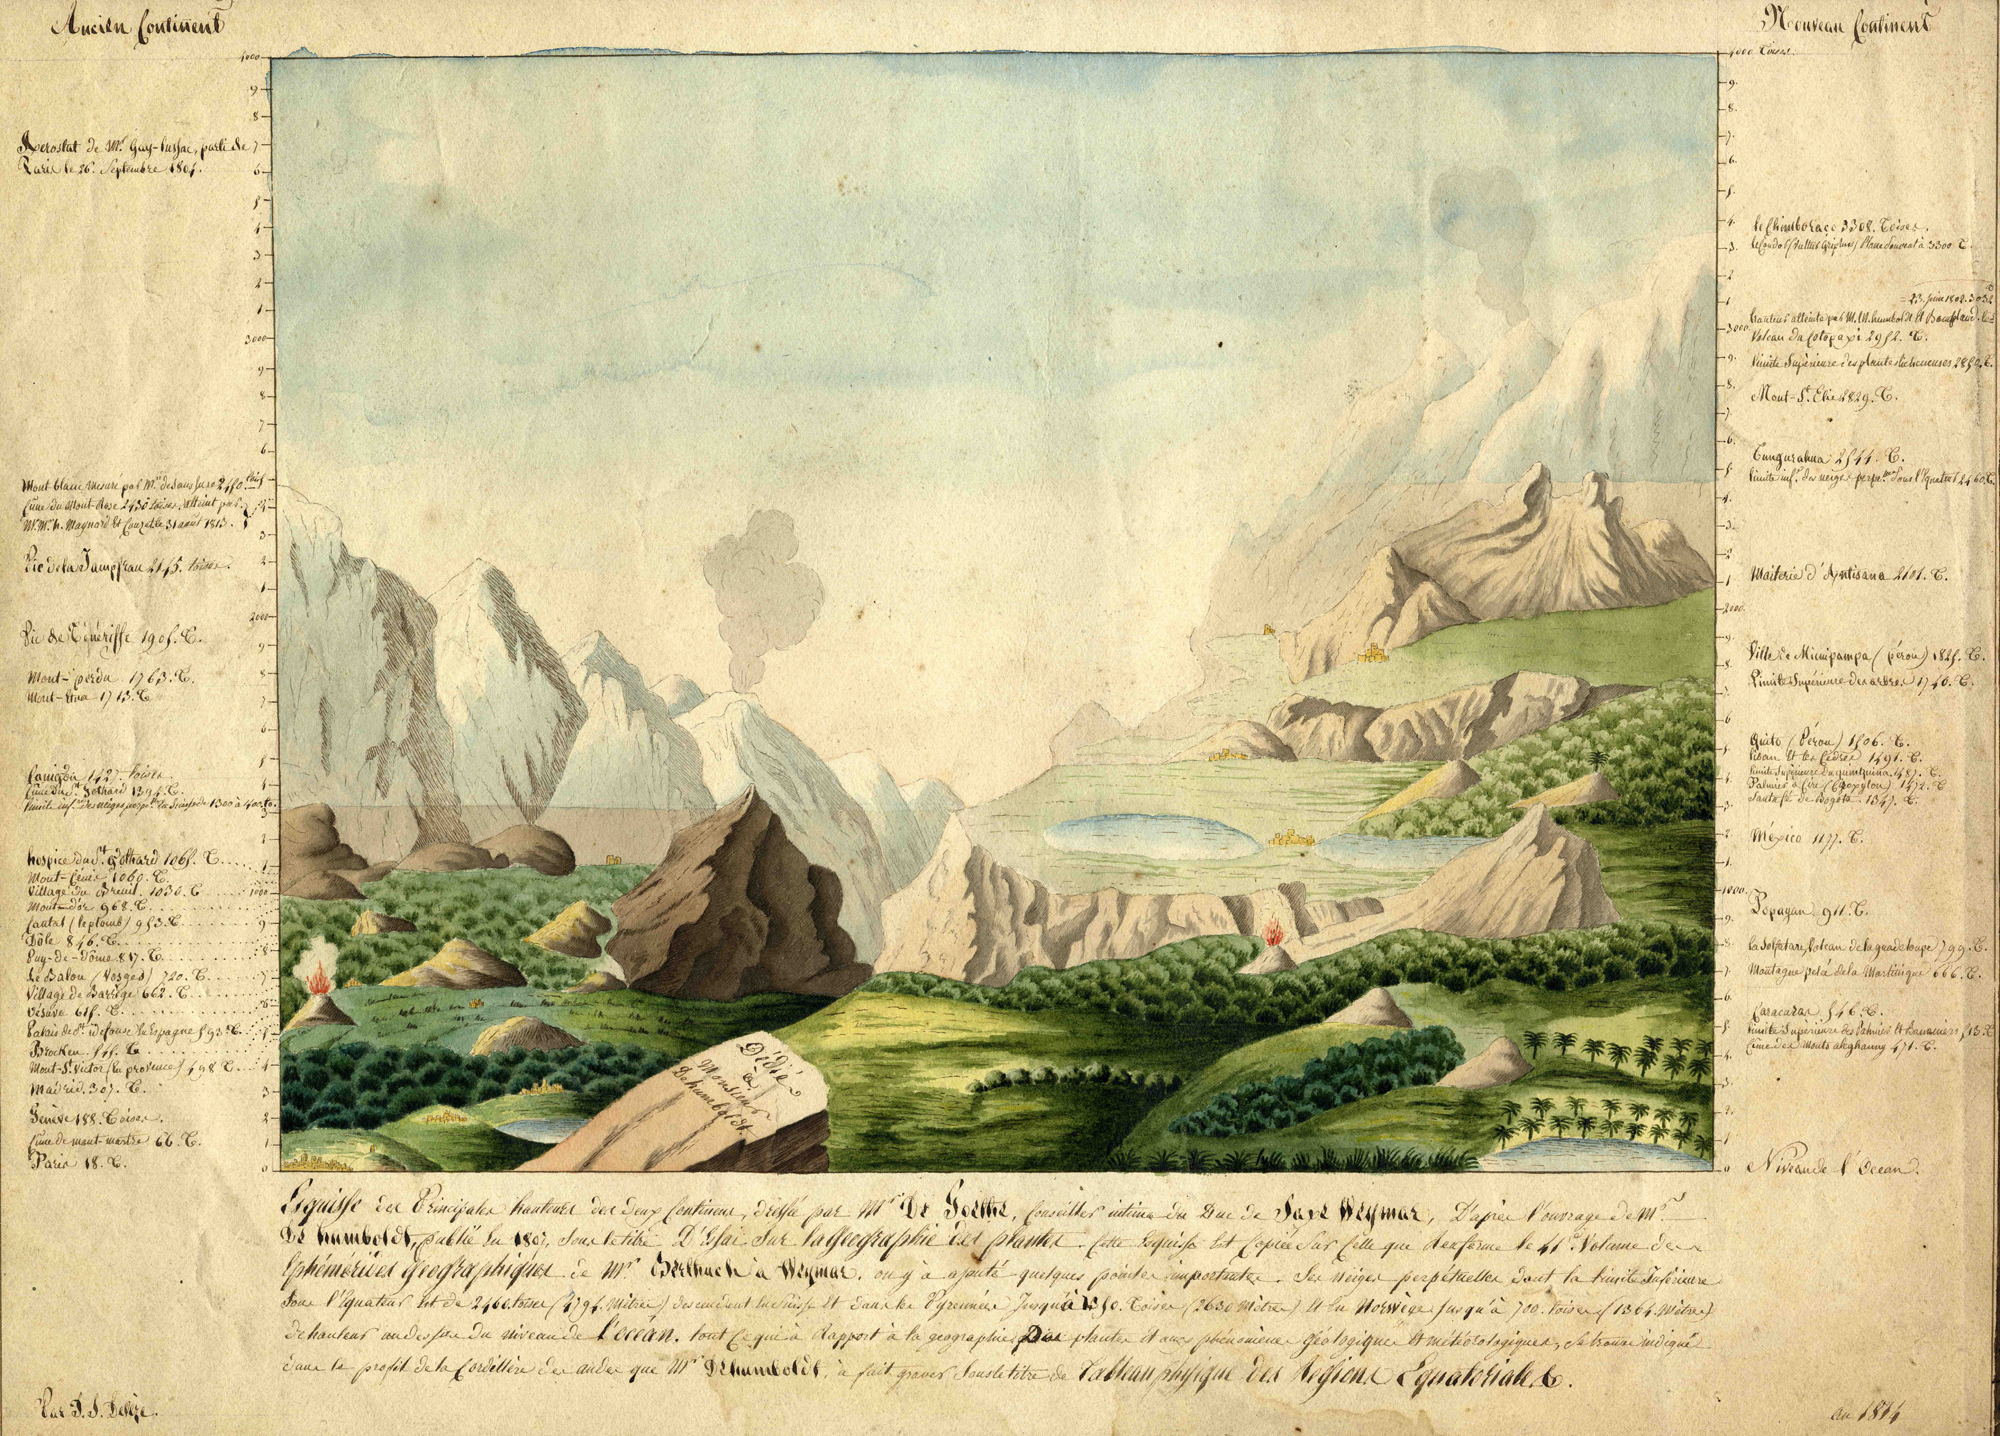  Humboldt often worked with his friend, Goethe, the famous German poet, statesman and scientist. Here they collaborated on Goethe's observations of alpine plants ( source )&nbsp;&nbsp; 